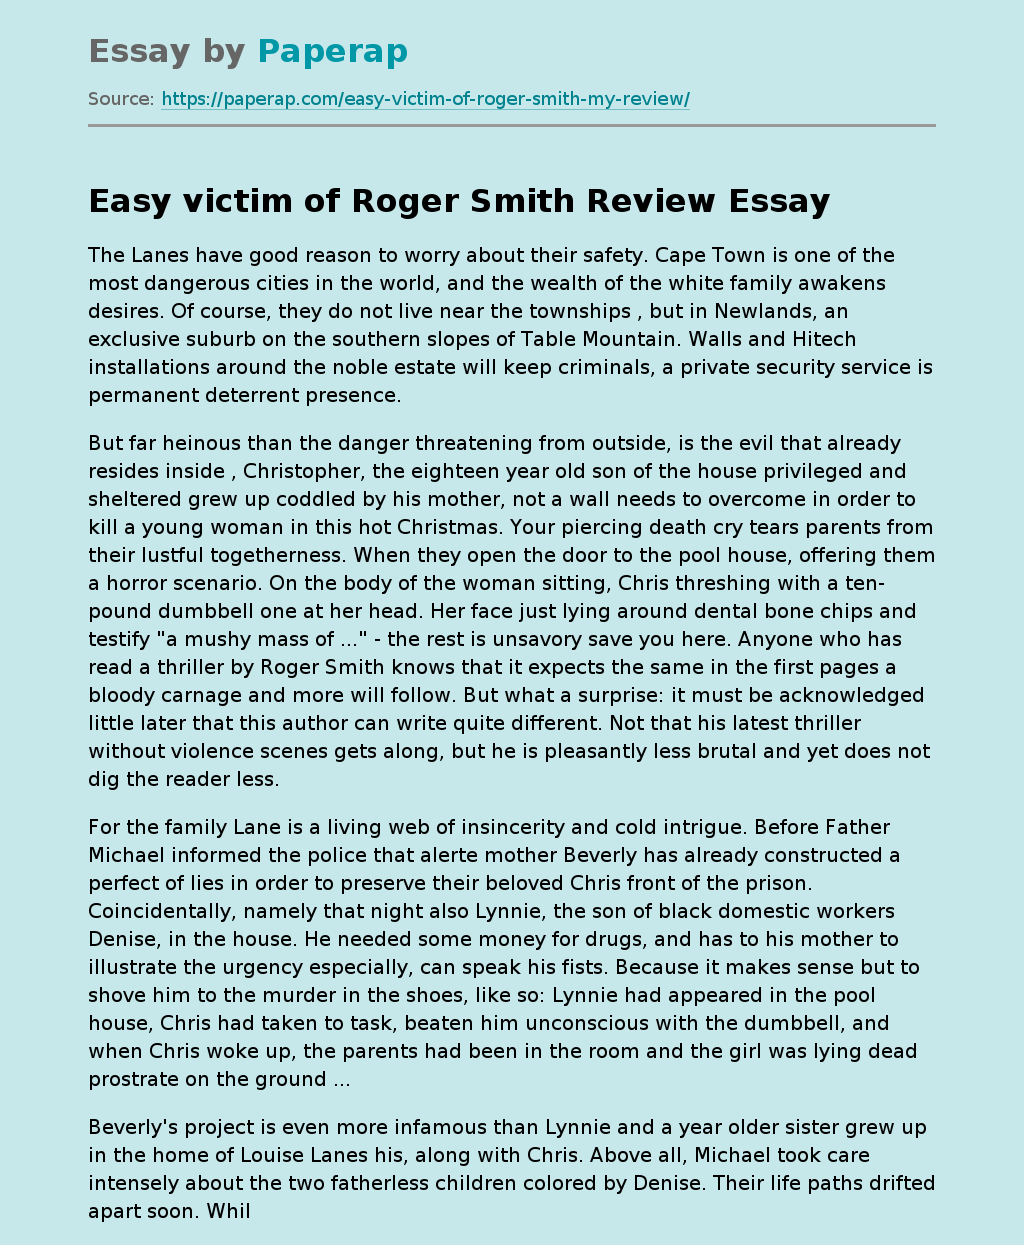 "Easy victim" by Roger Smith